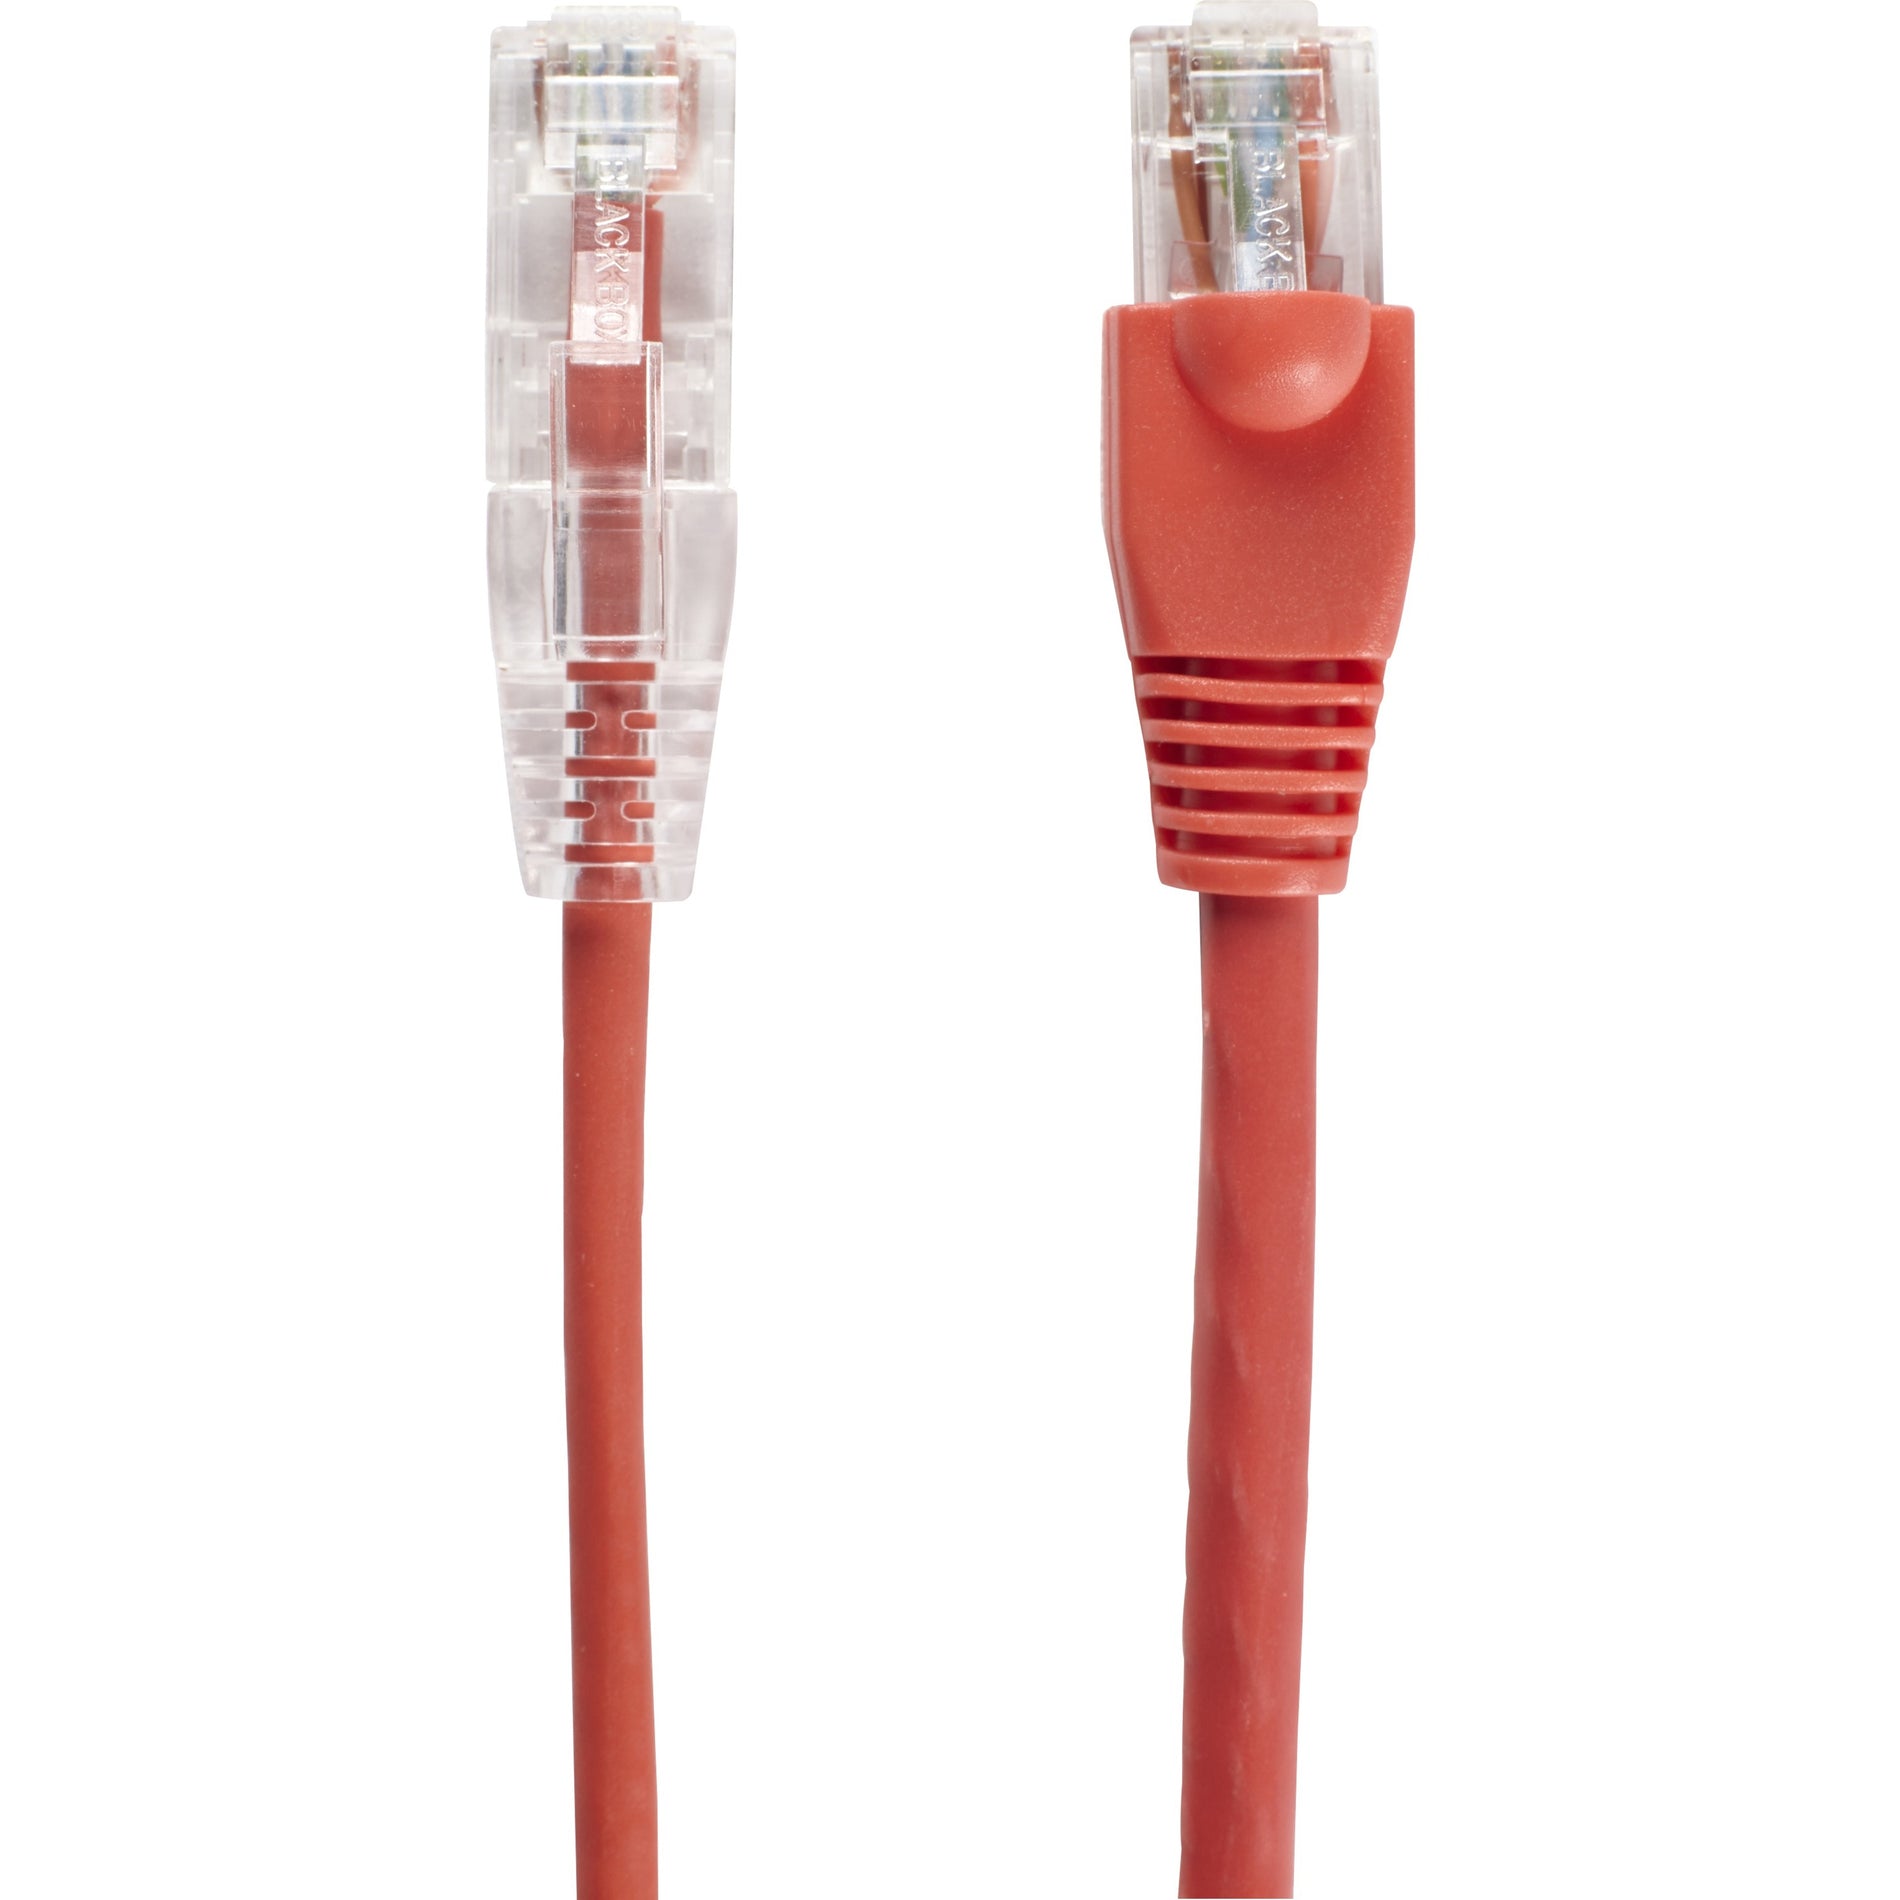 Black Box C6APC28-RD-04 Slim-Net Cat.6a UTP Patch Network Cable, 4 ft, Red